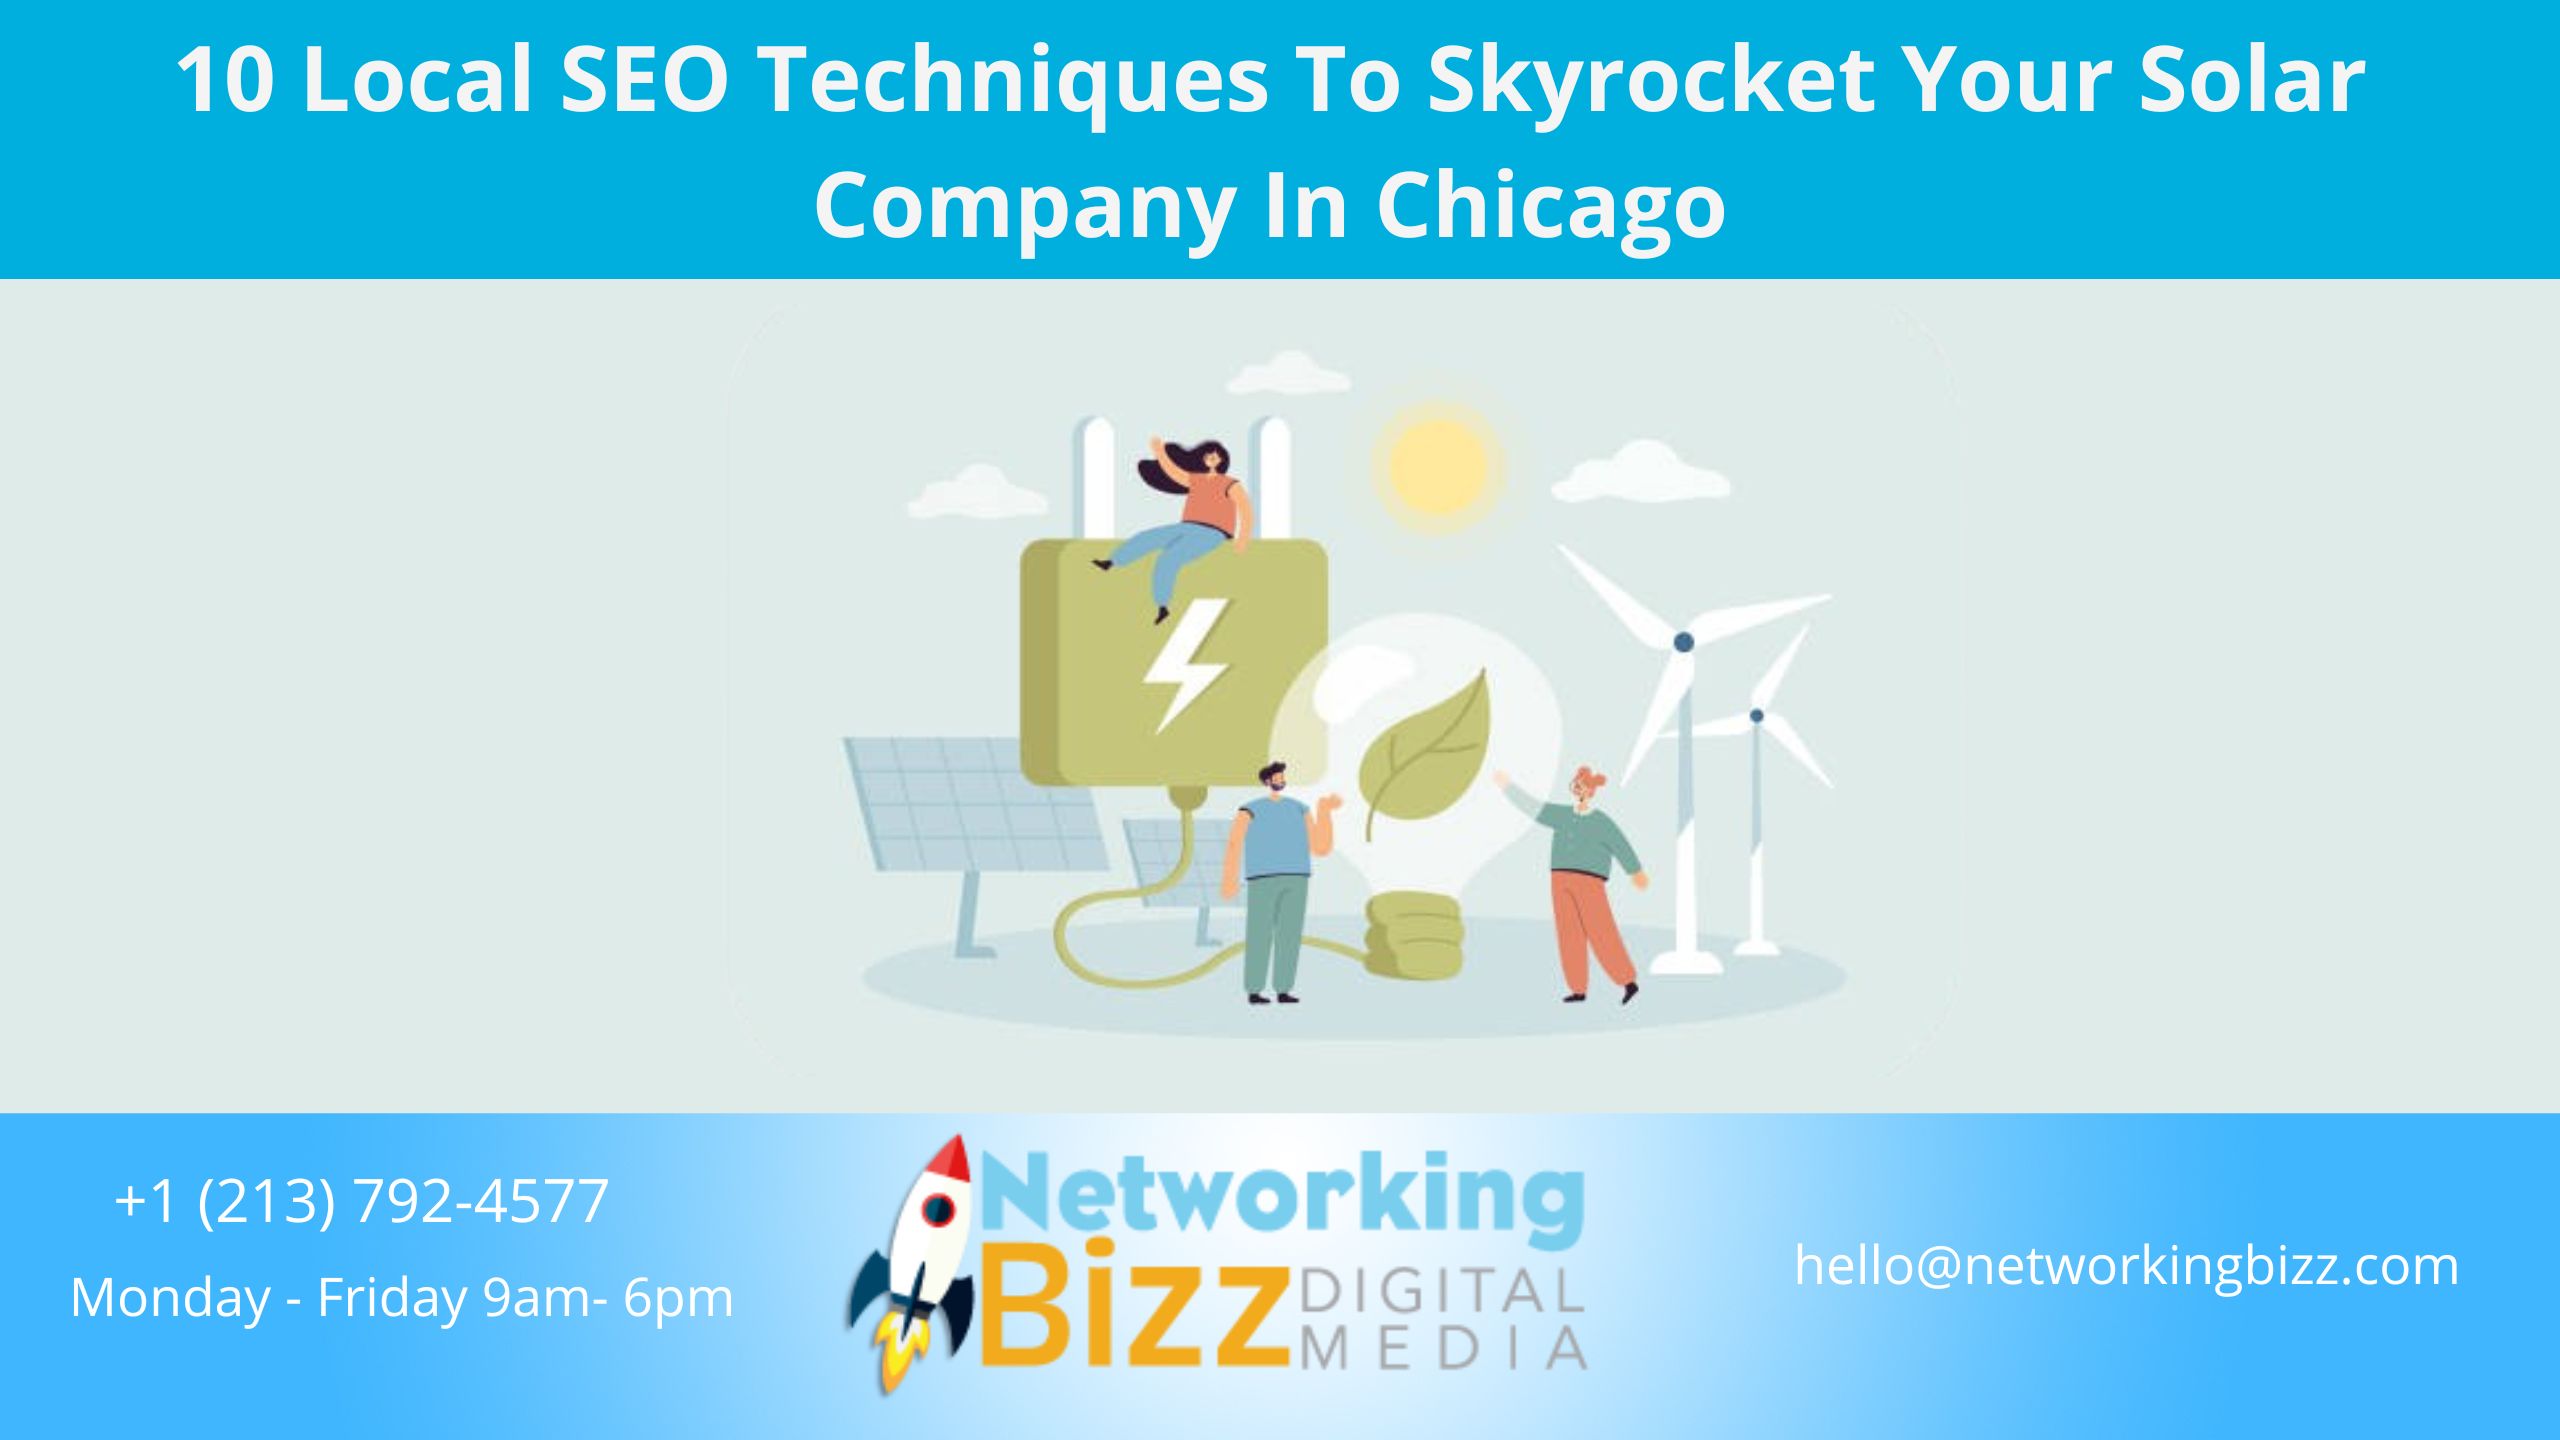 10 Local SEO Techniques To Skyrocket Your Solar Company In Chicago